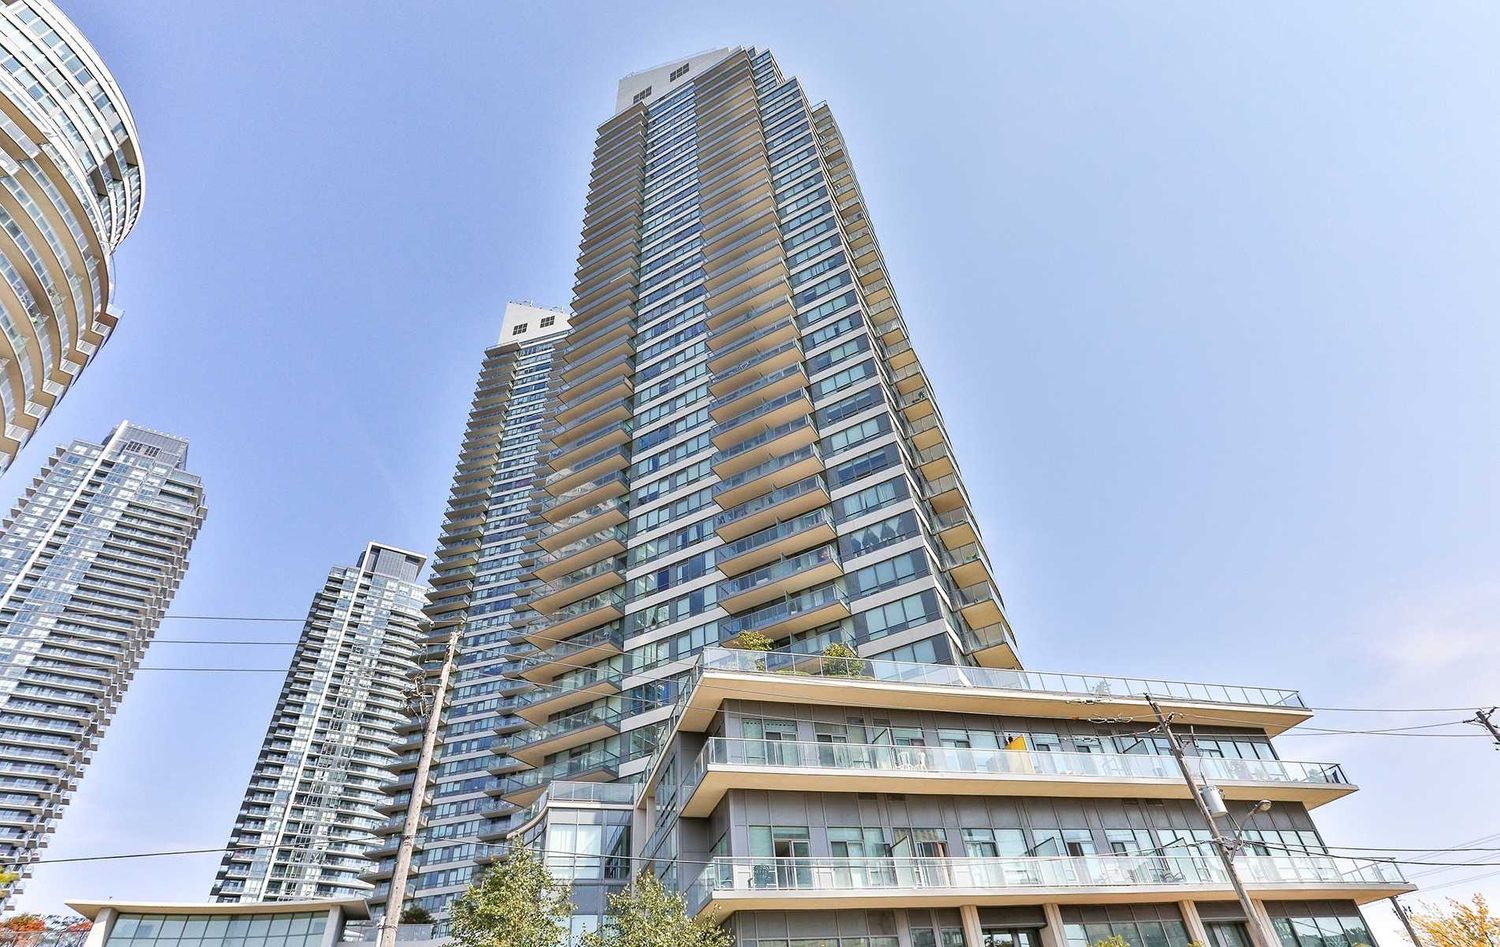 2240 Lake Shore Blvd. This condo at Beyond The Sea - South Tower is located in  Etobicoke, Toronto - image #2 of 2 by Strata.ca